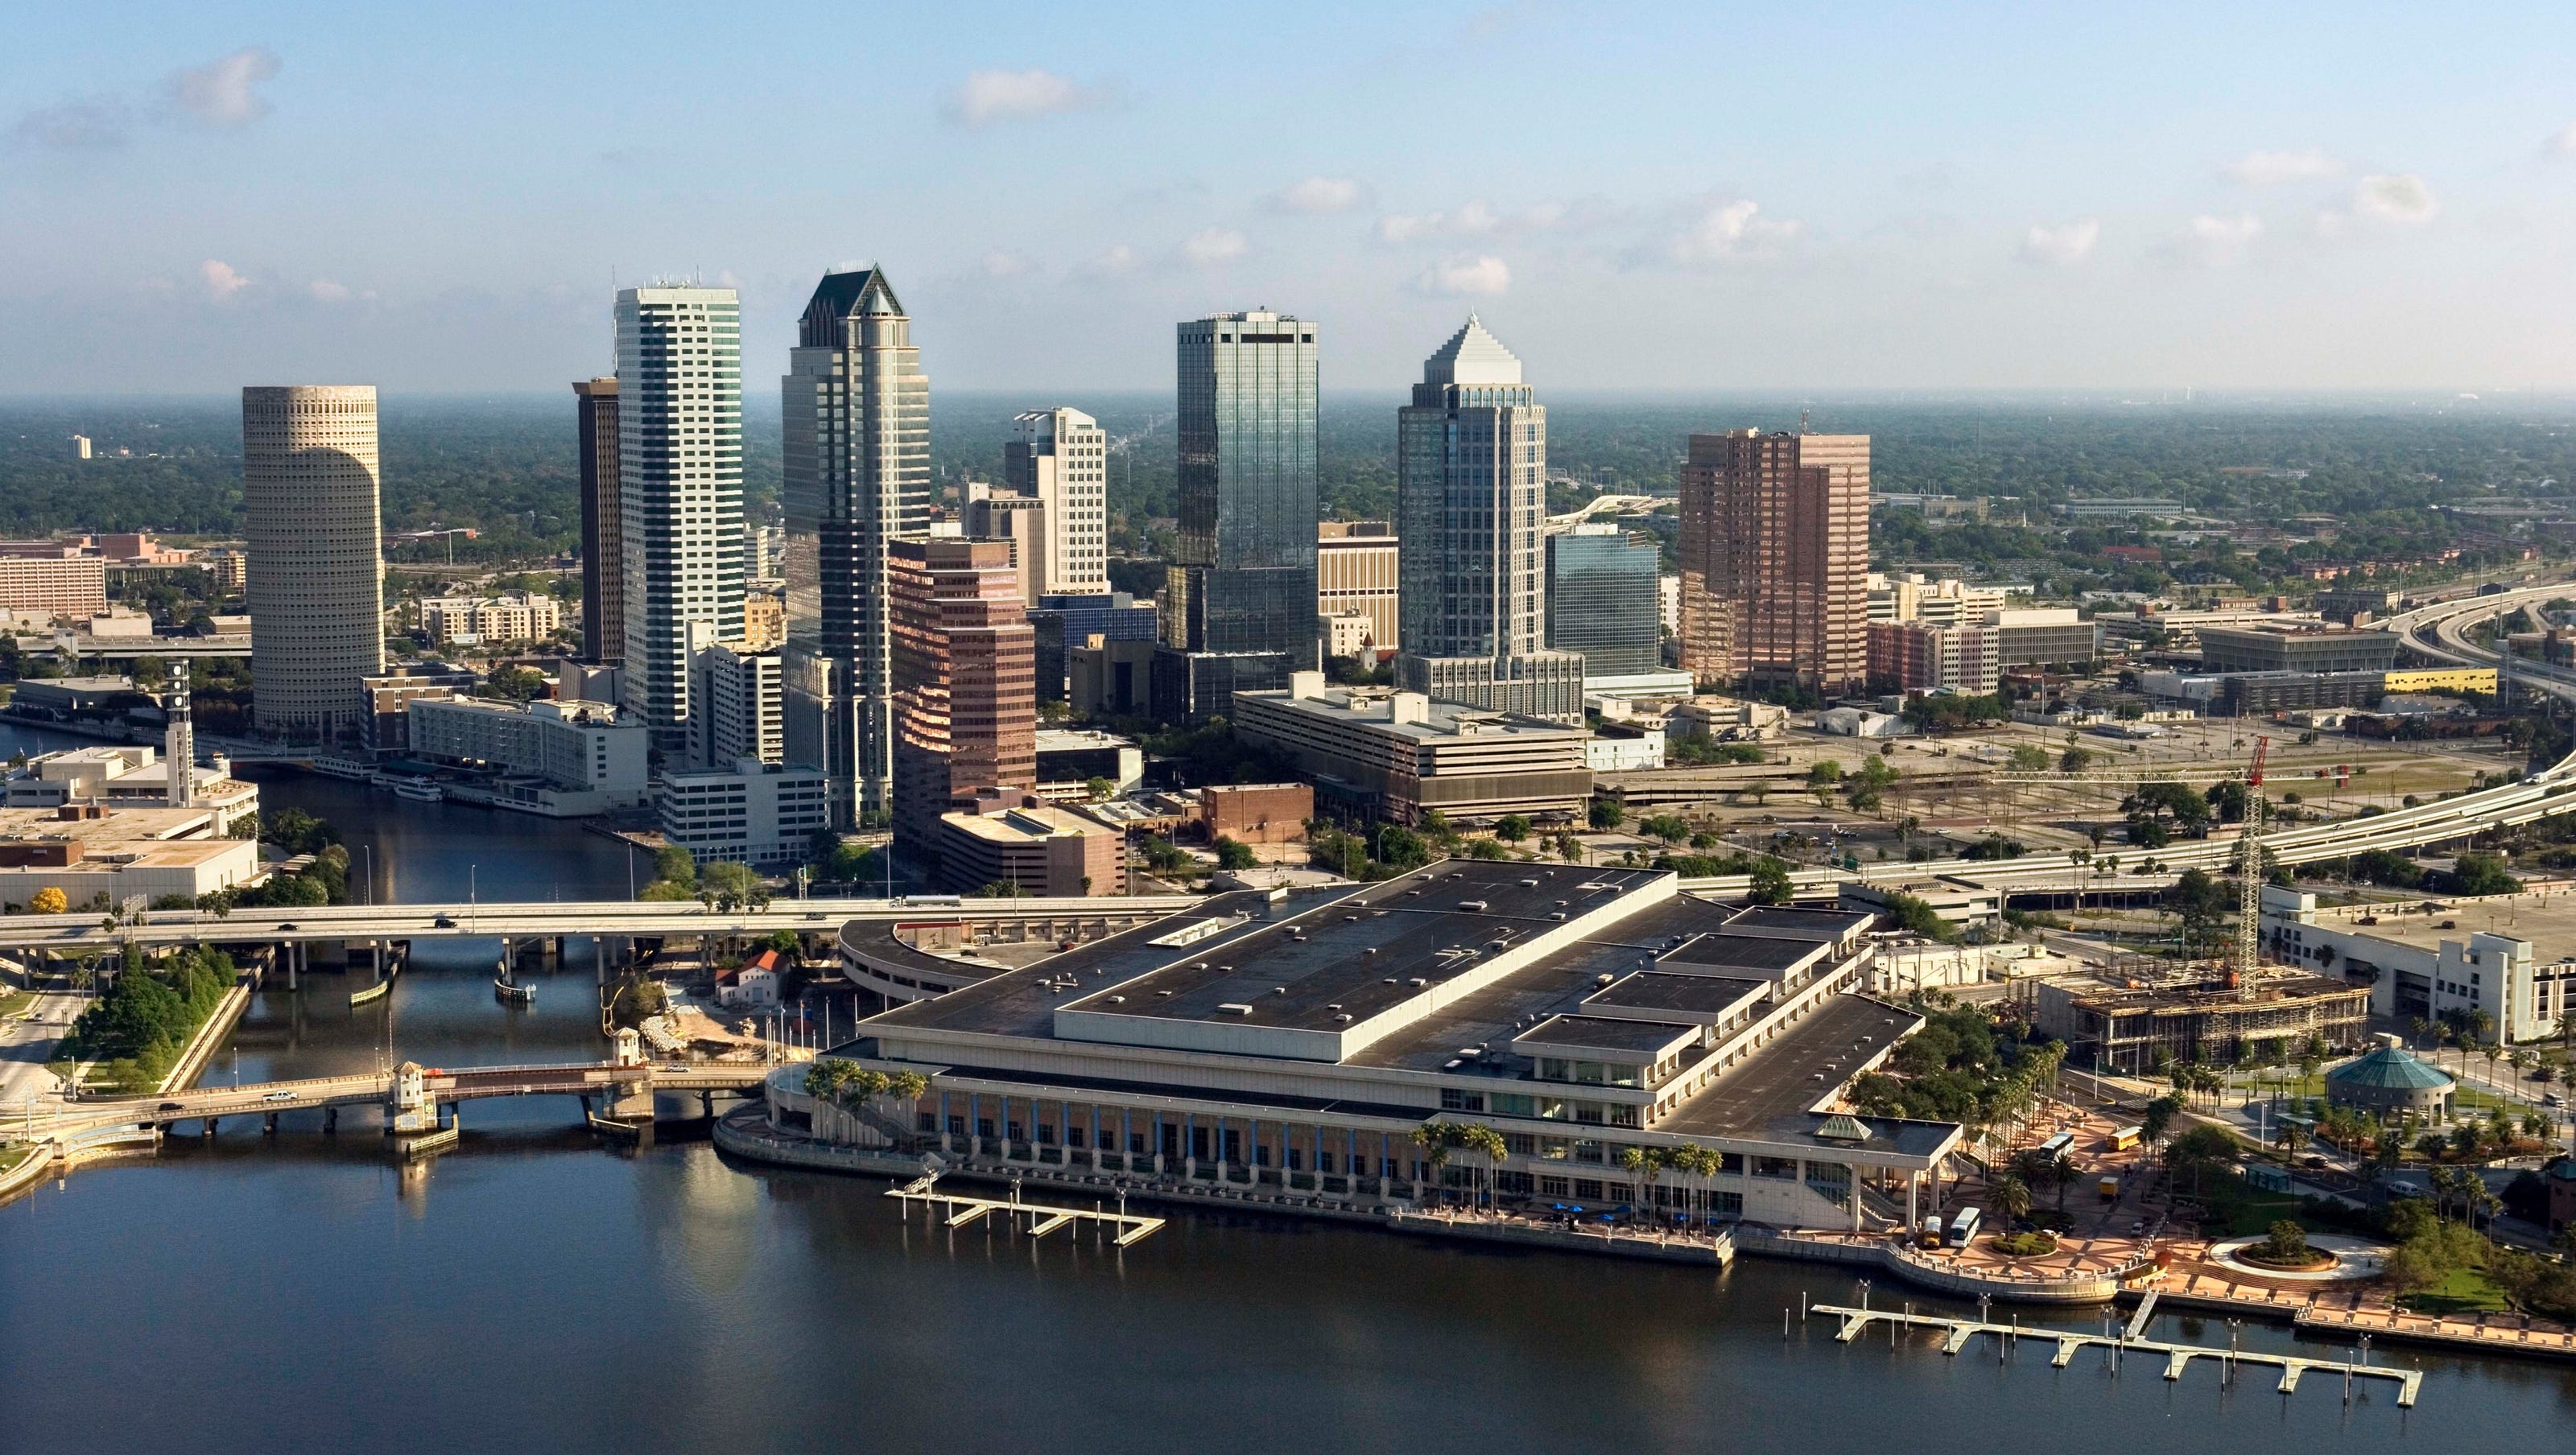 All eyes are on Super Bowl host city Tampa, Florida: Here are 10 famous pla...